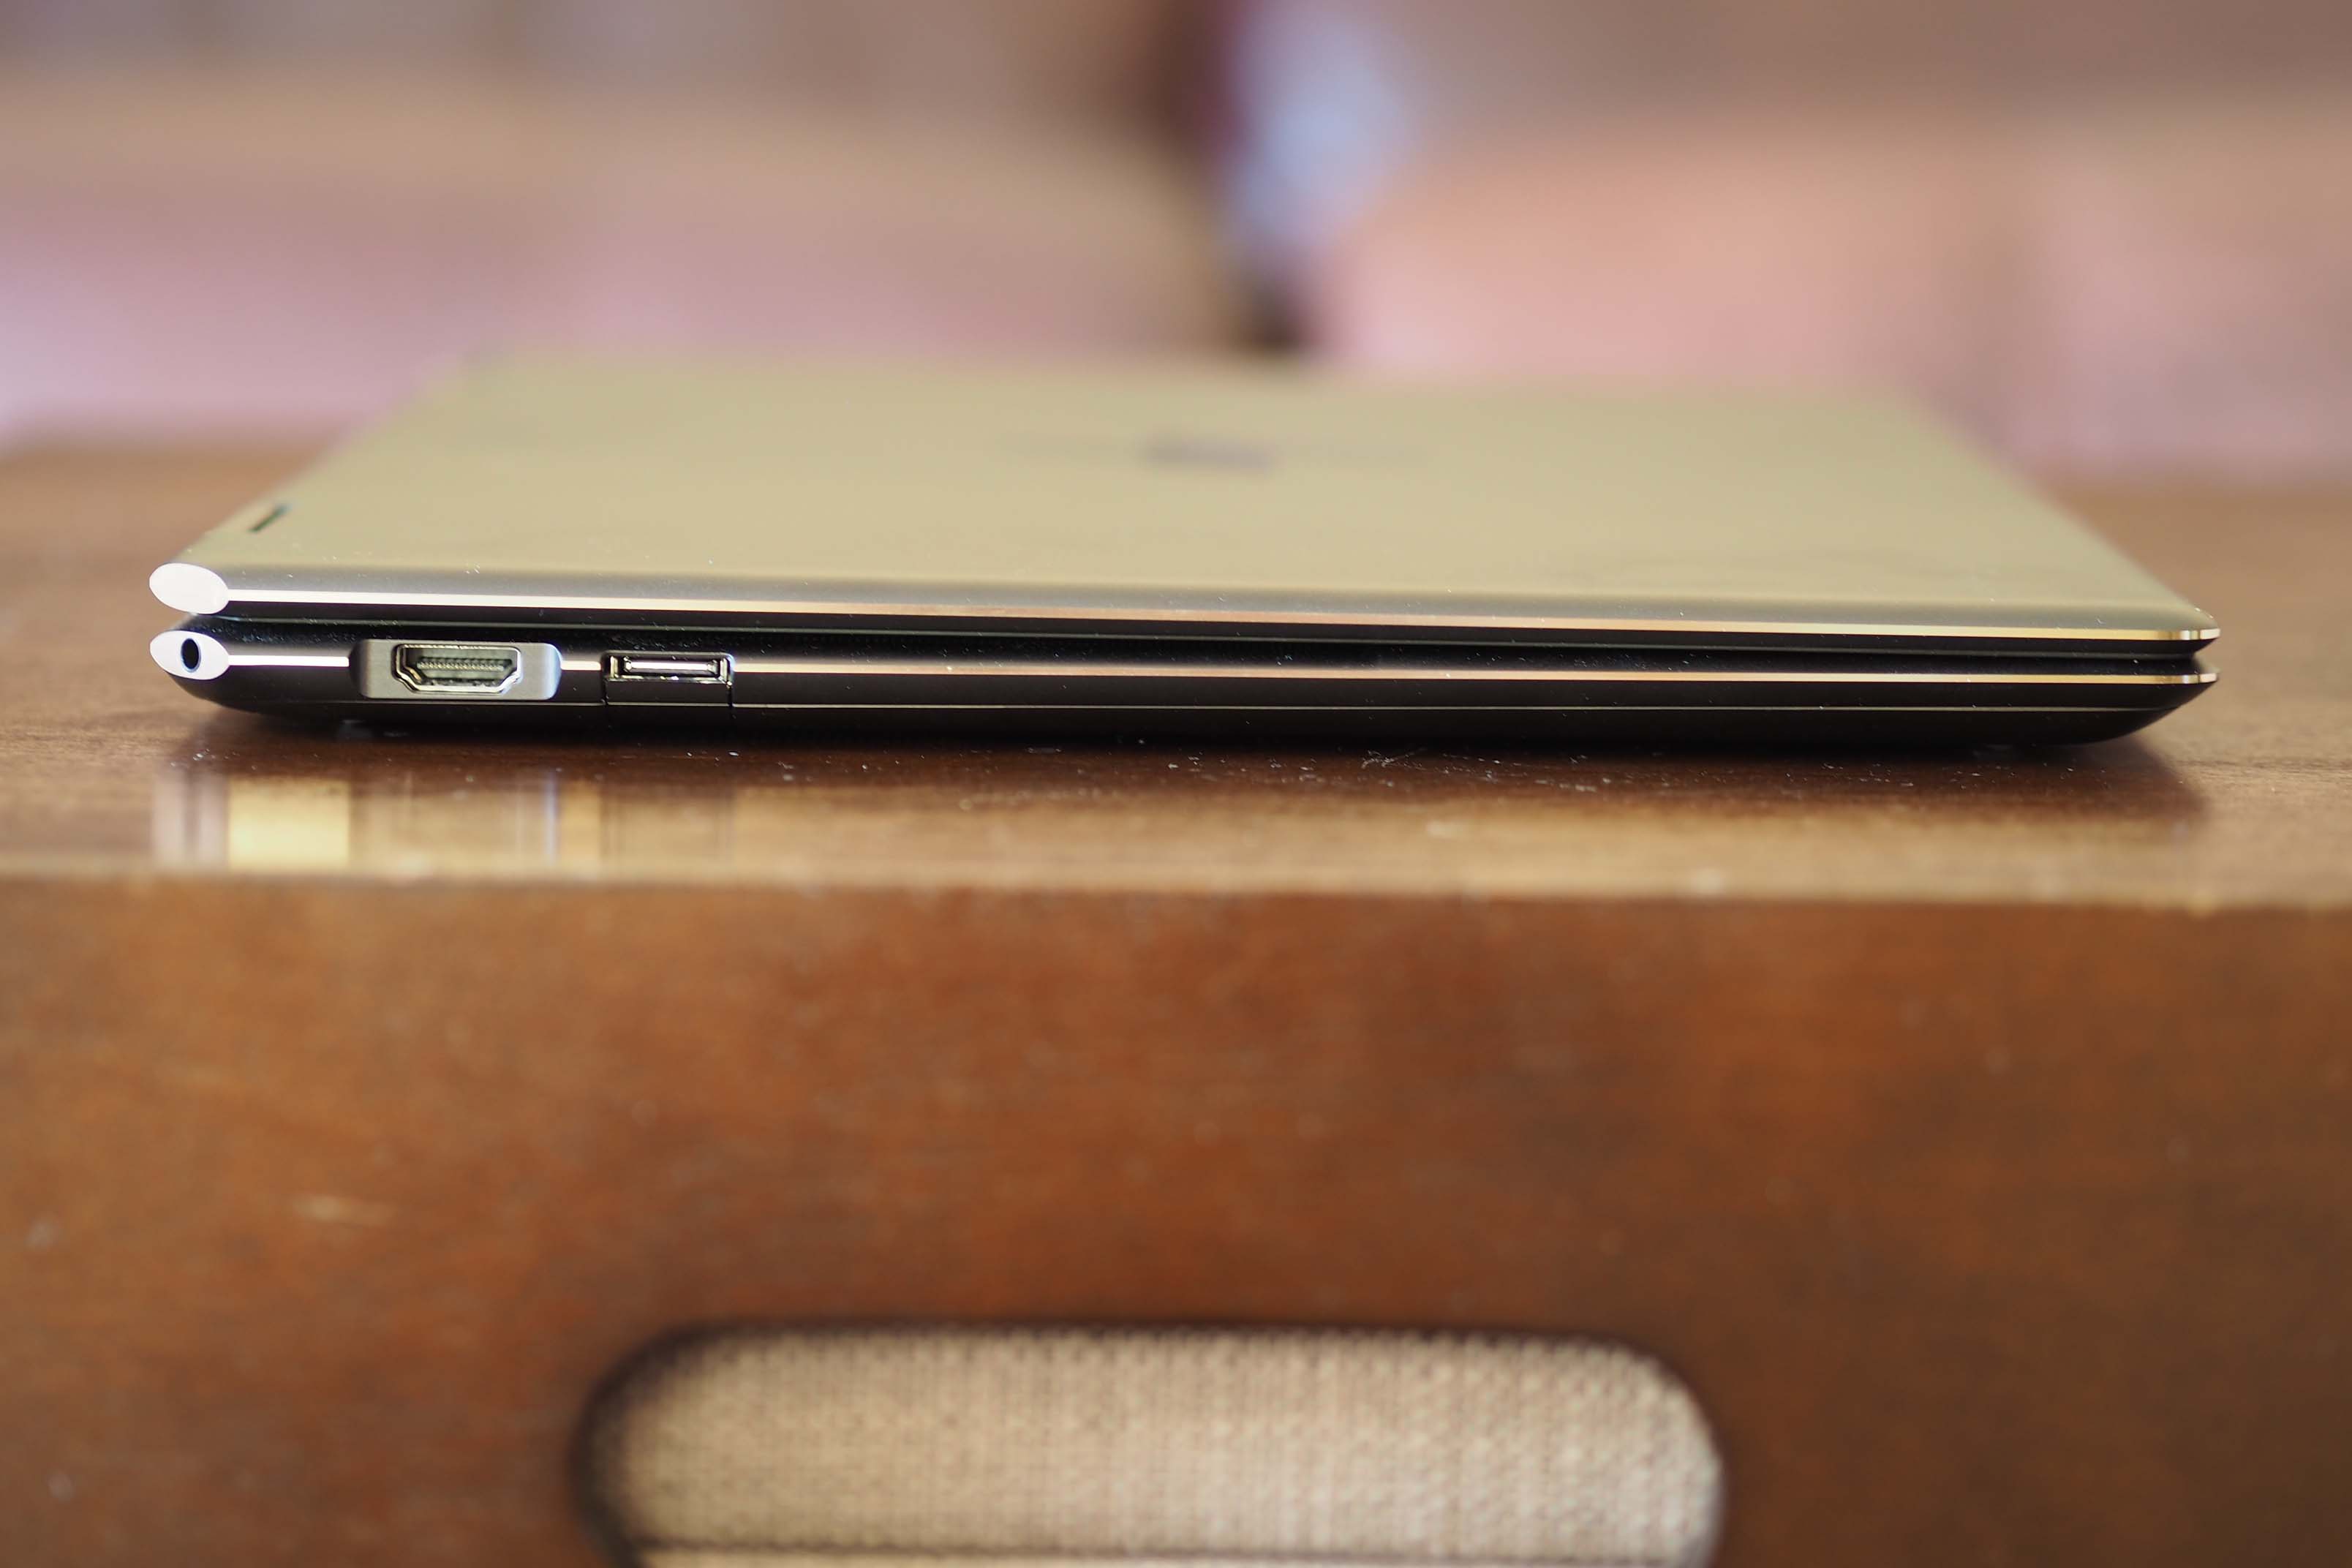 HP Spectre x360 16 review: Price, design, performance and more